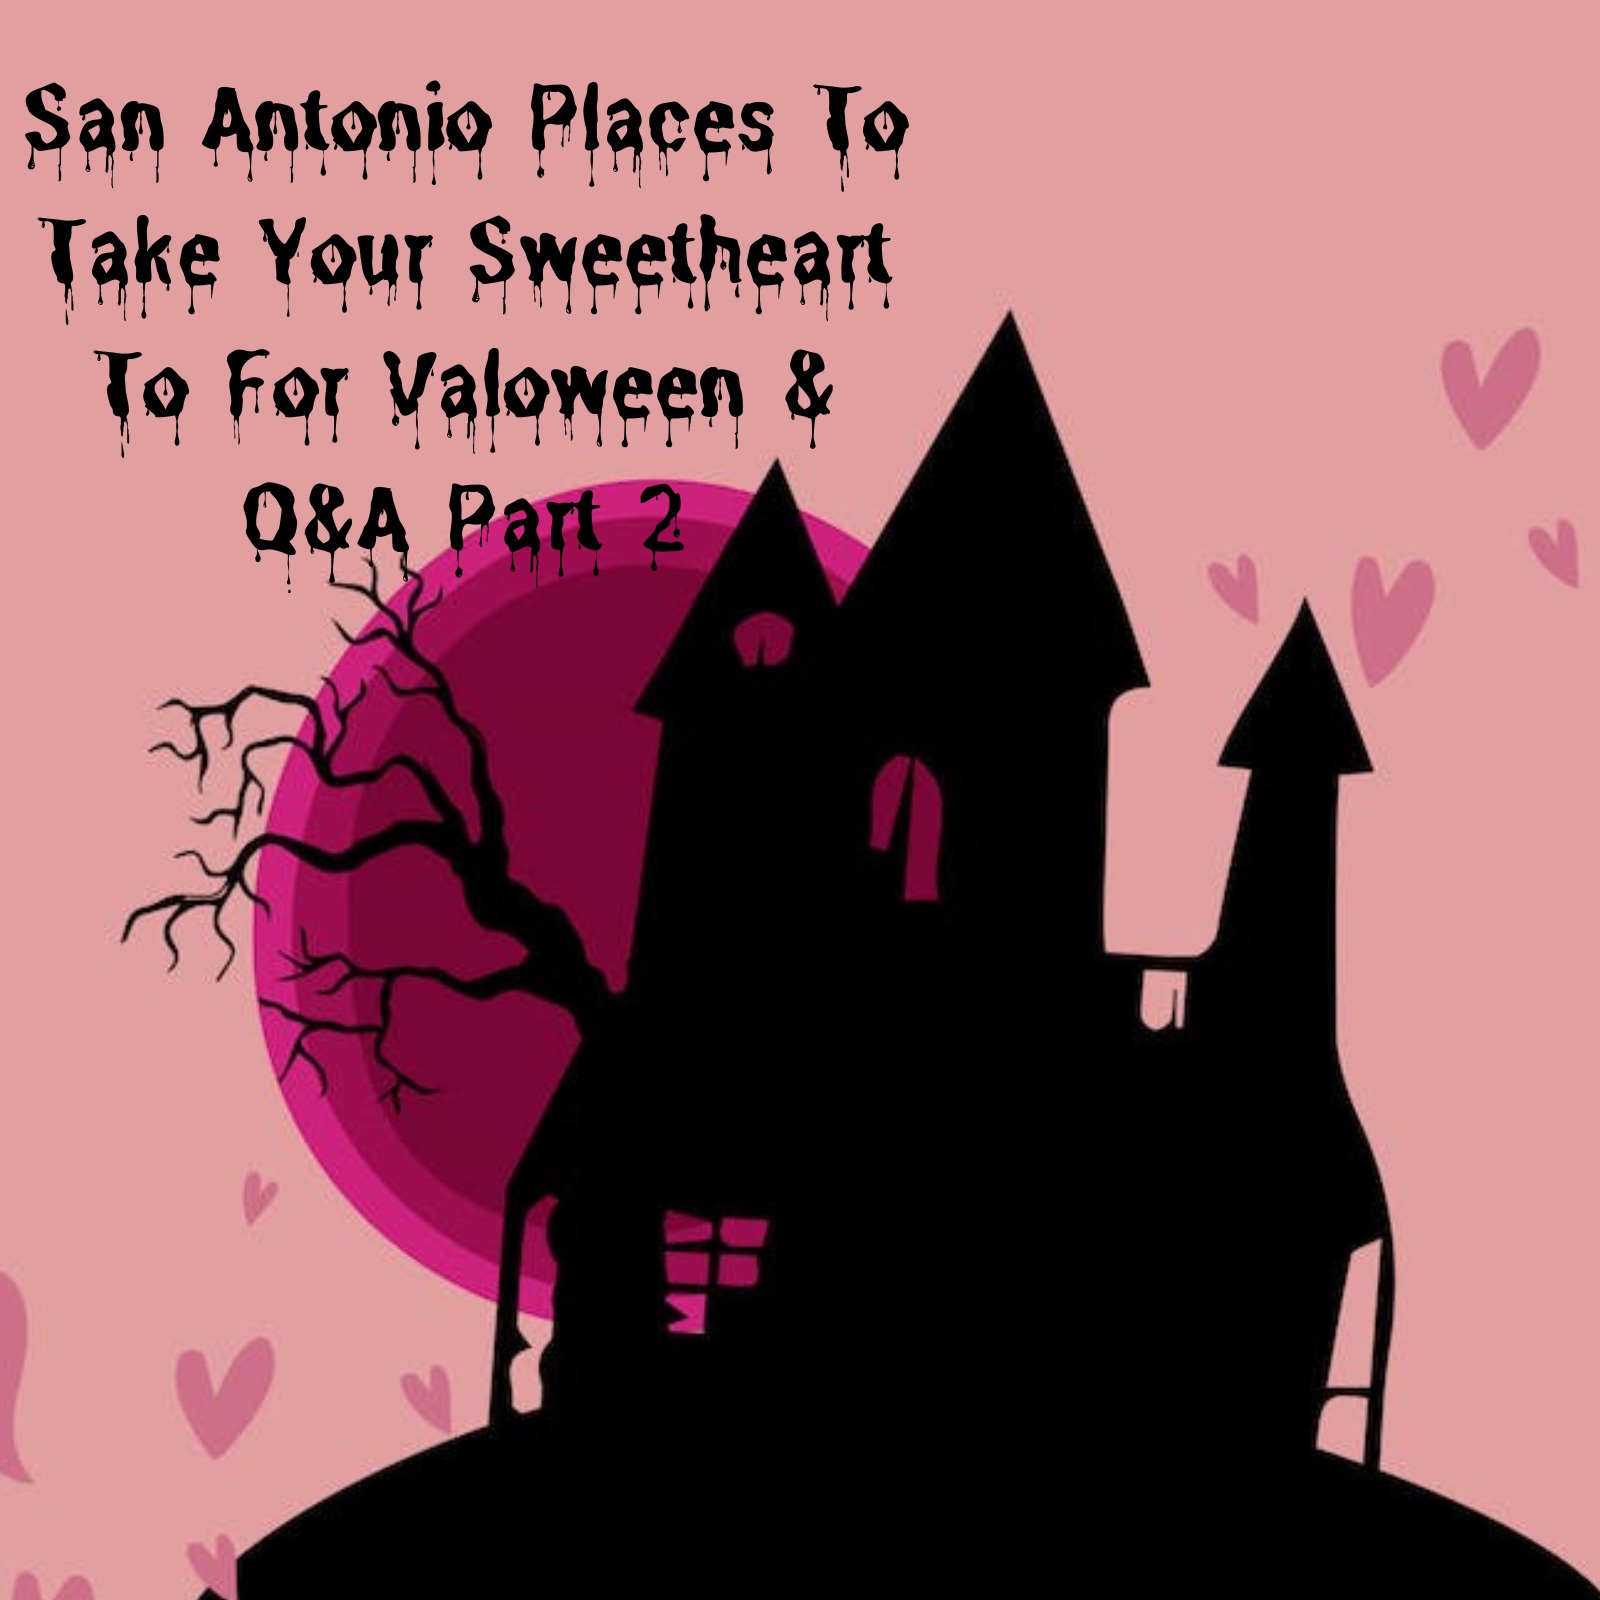 SA Spooky Places To Take Your Sweetheart To For Valoween & Q&A Part 2